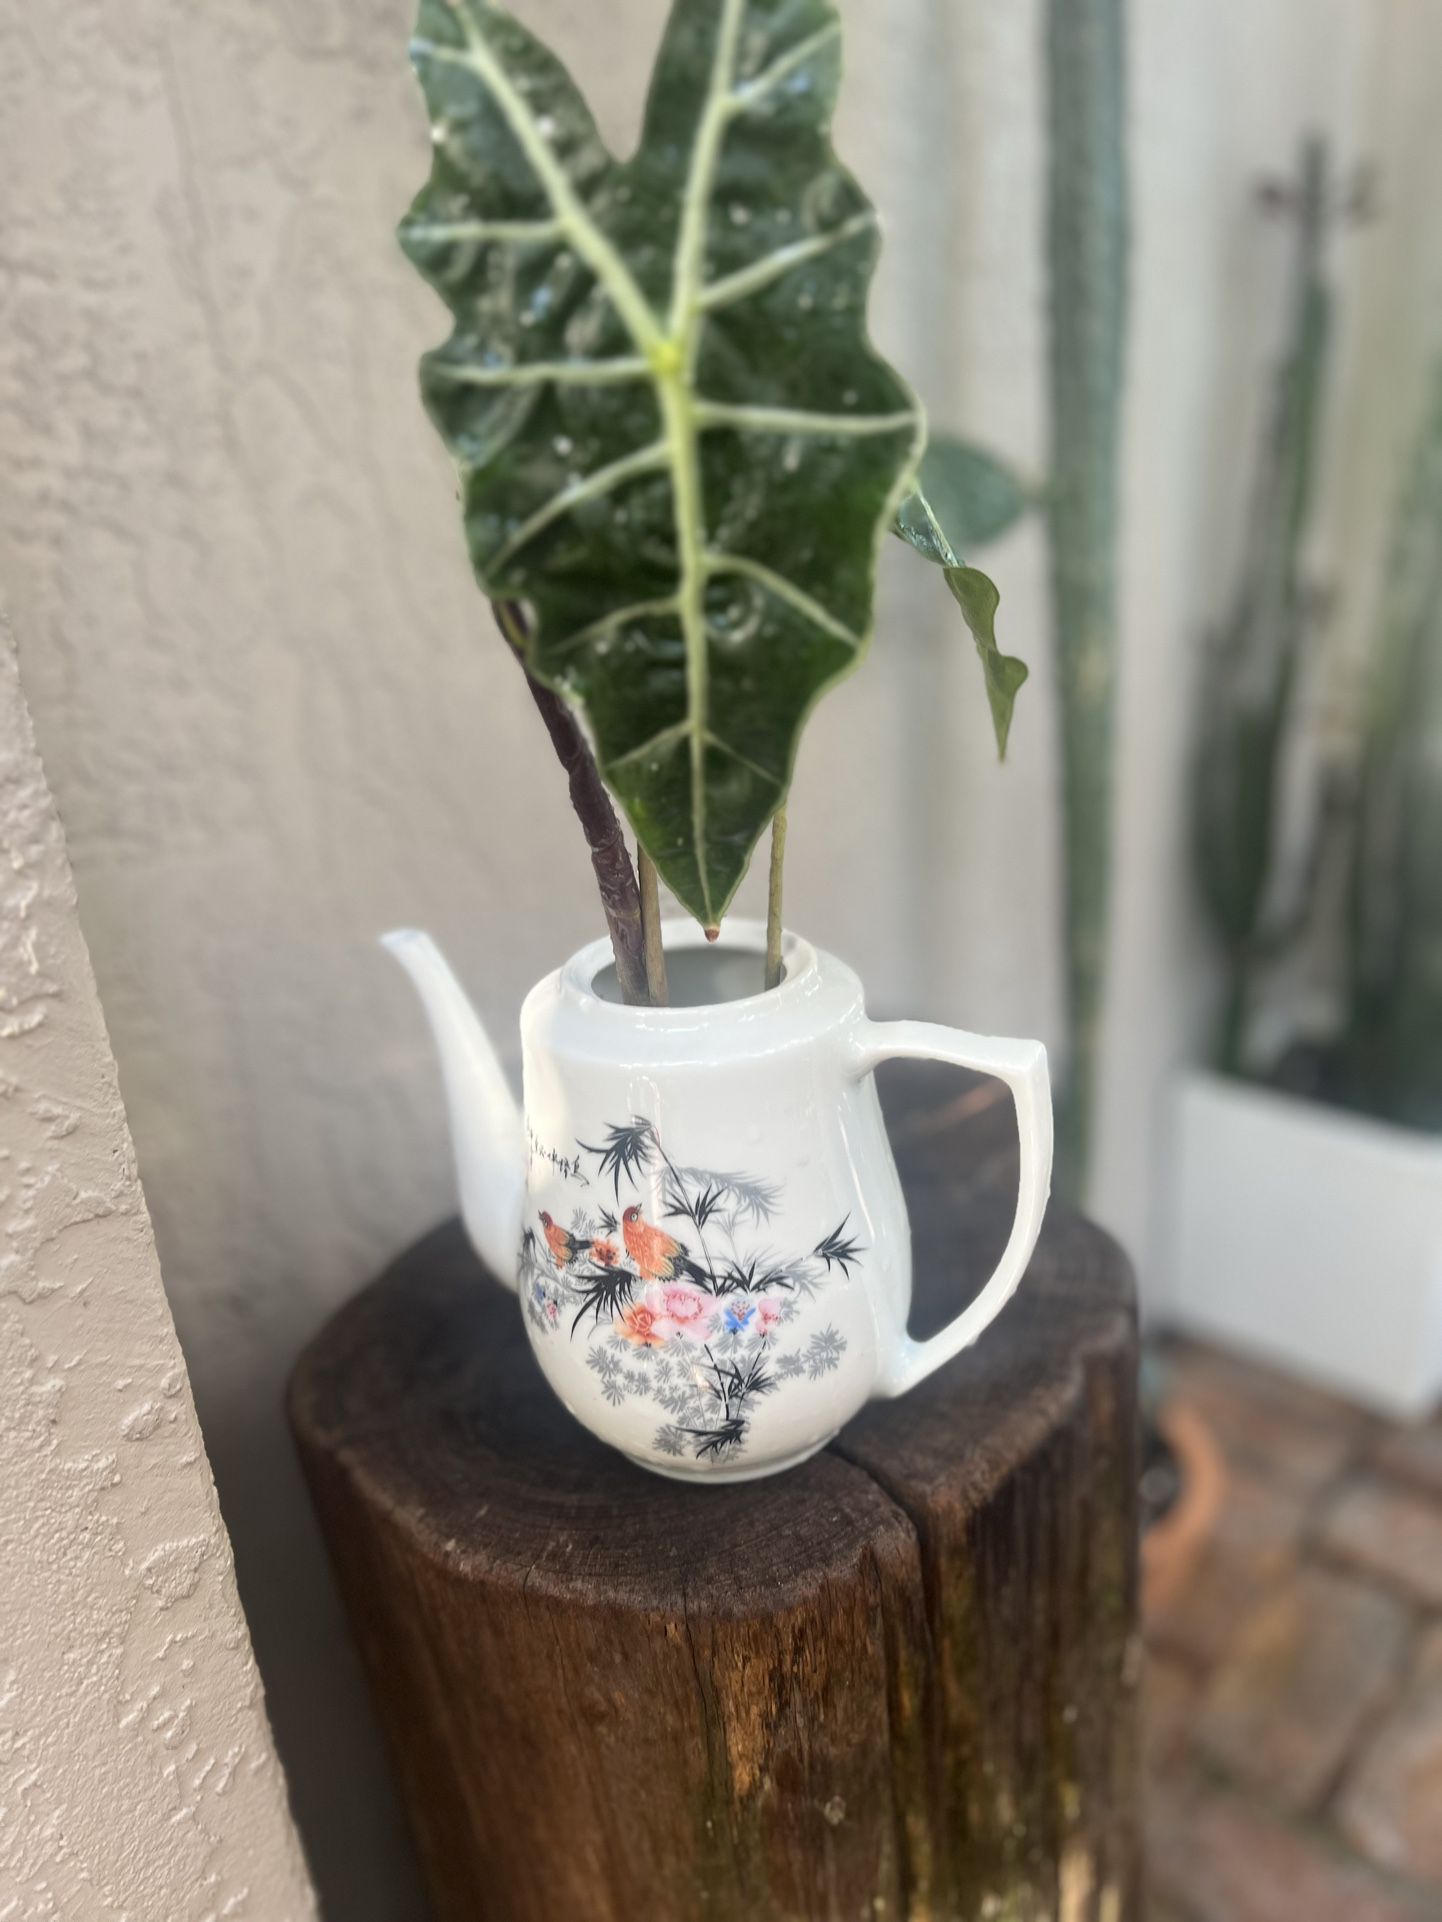 Authentic Chinese Tea Kettle Used As Planter 